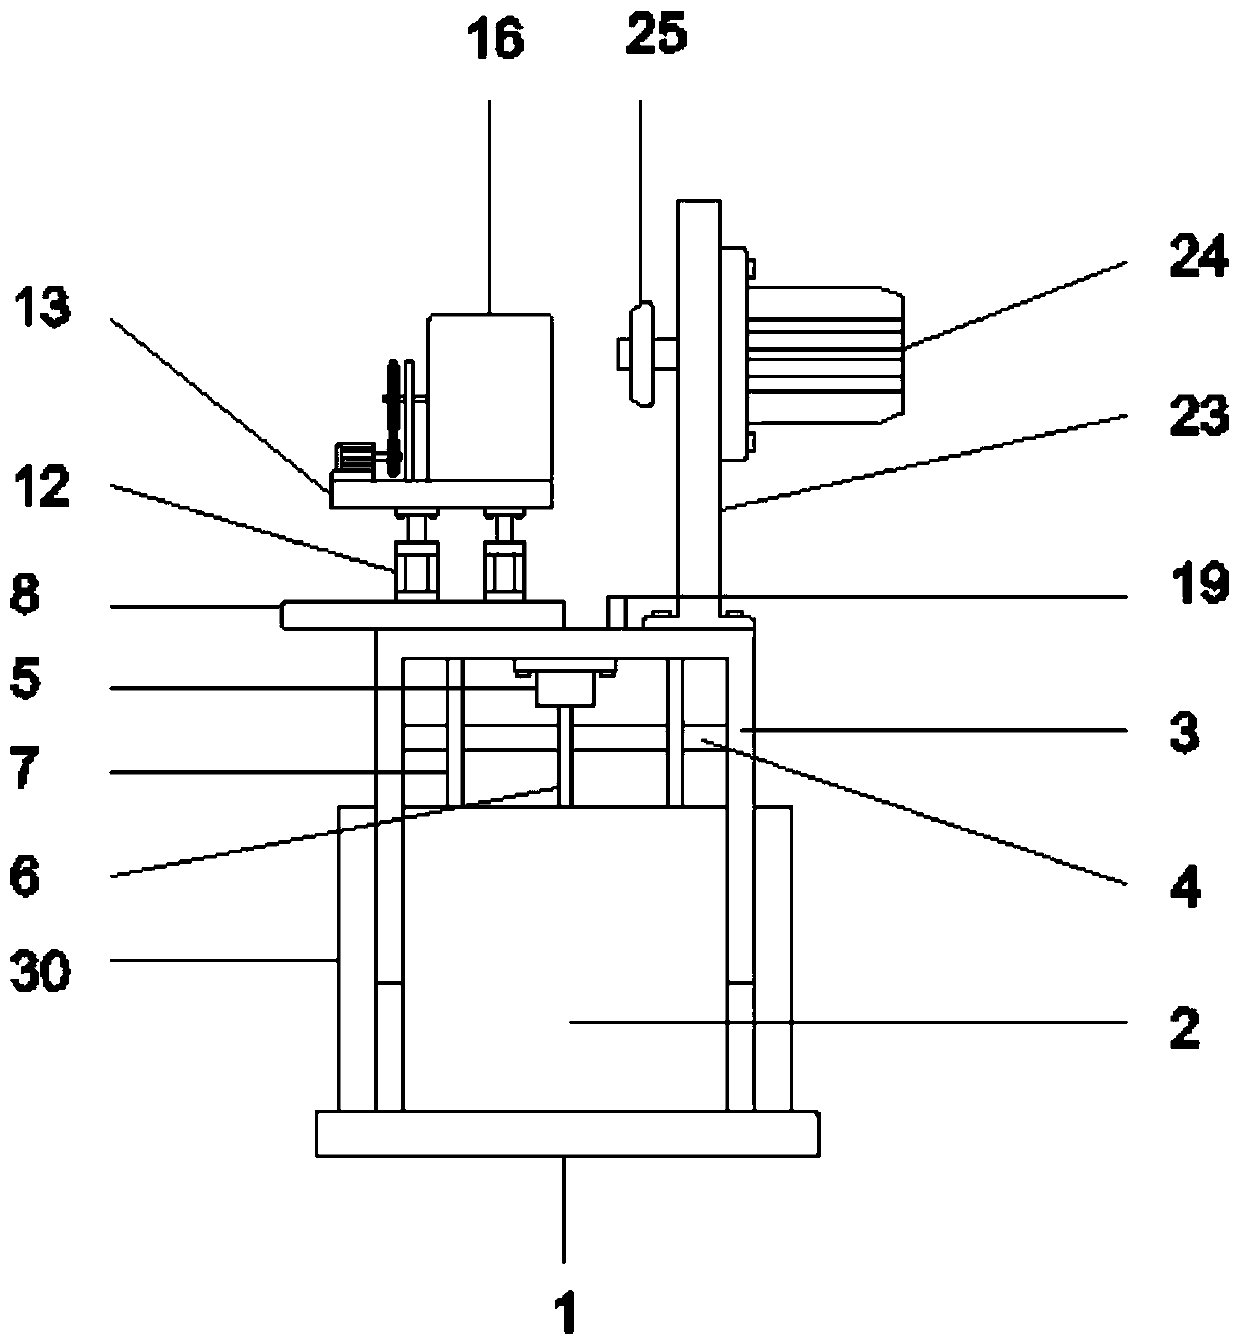 A carbon rod end chamfering device